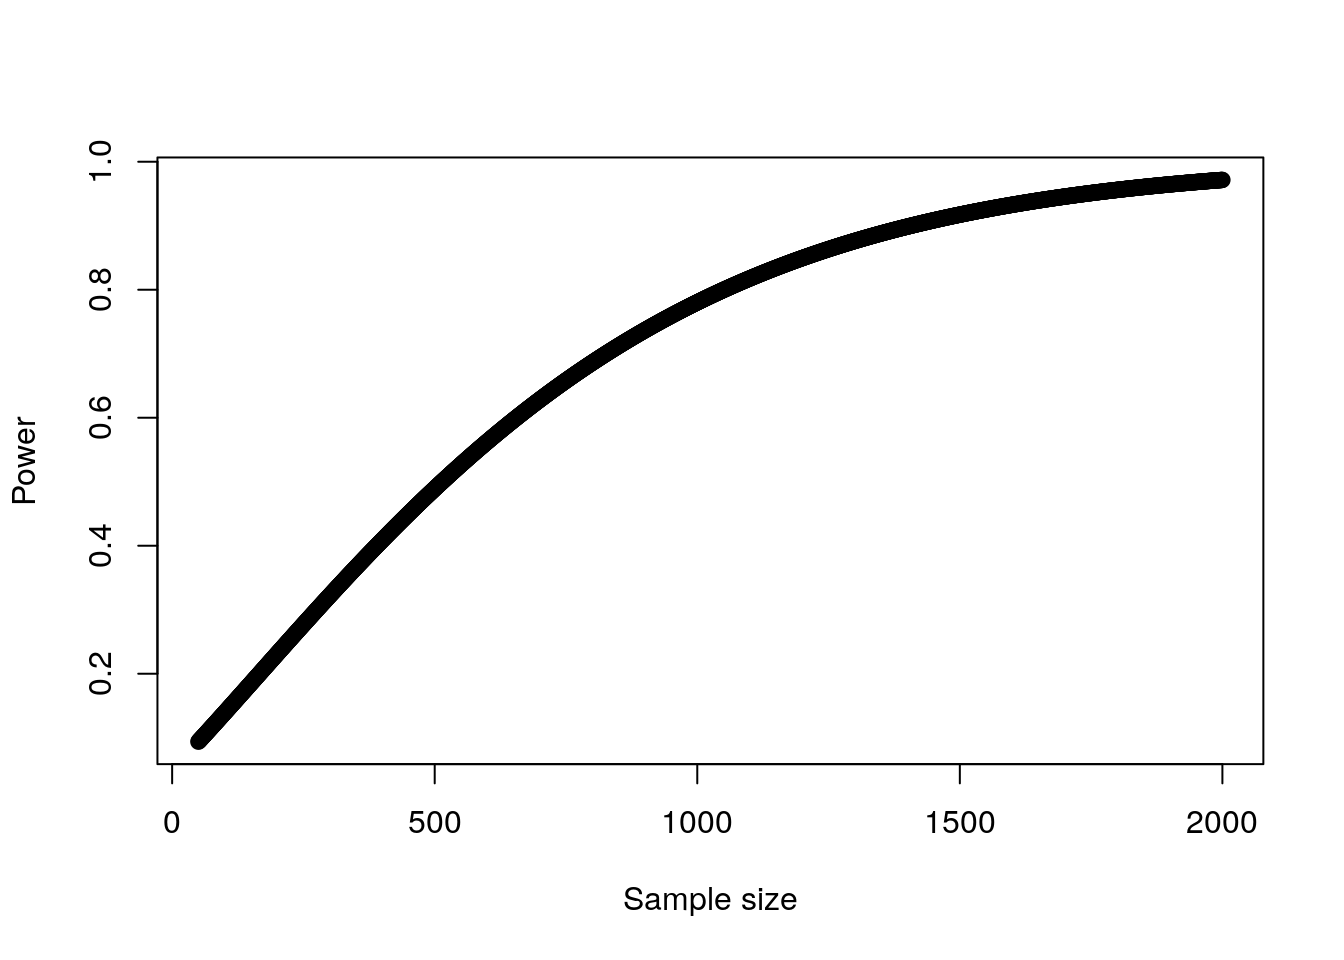 Plot of power against sample size for a single input variable in logistic regression